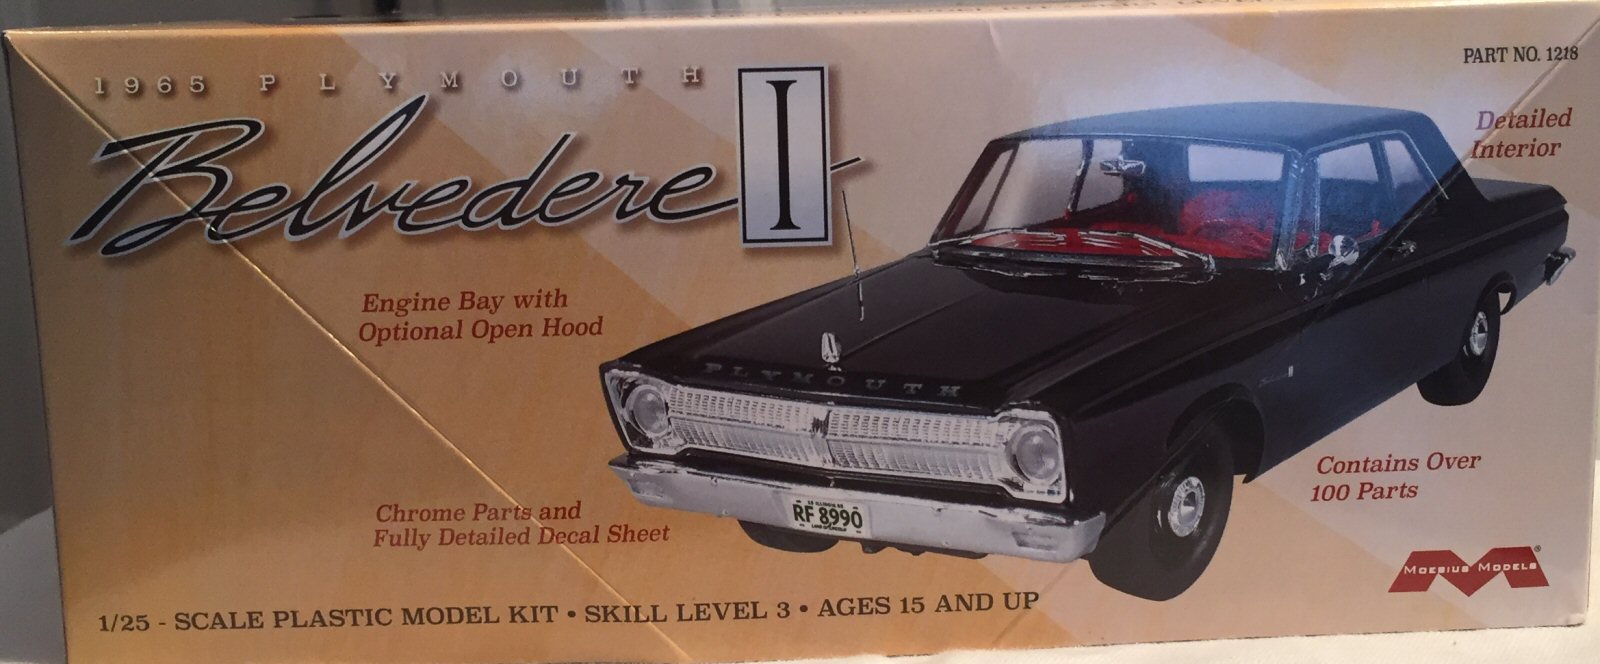 QOTD: Is This 1965 Plymouth Belvedere II Going To Be Saved